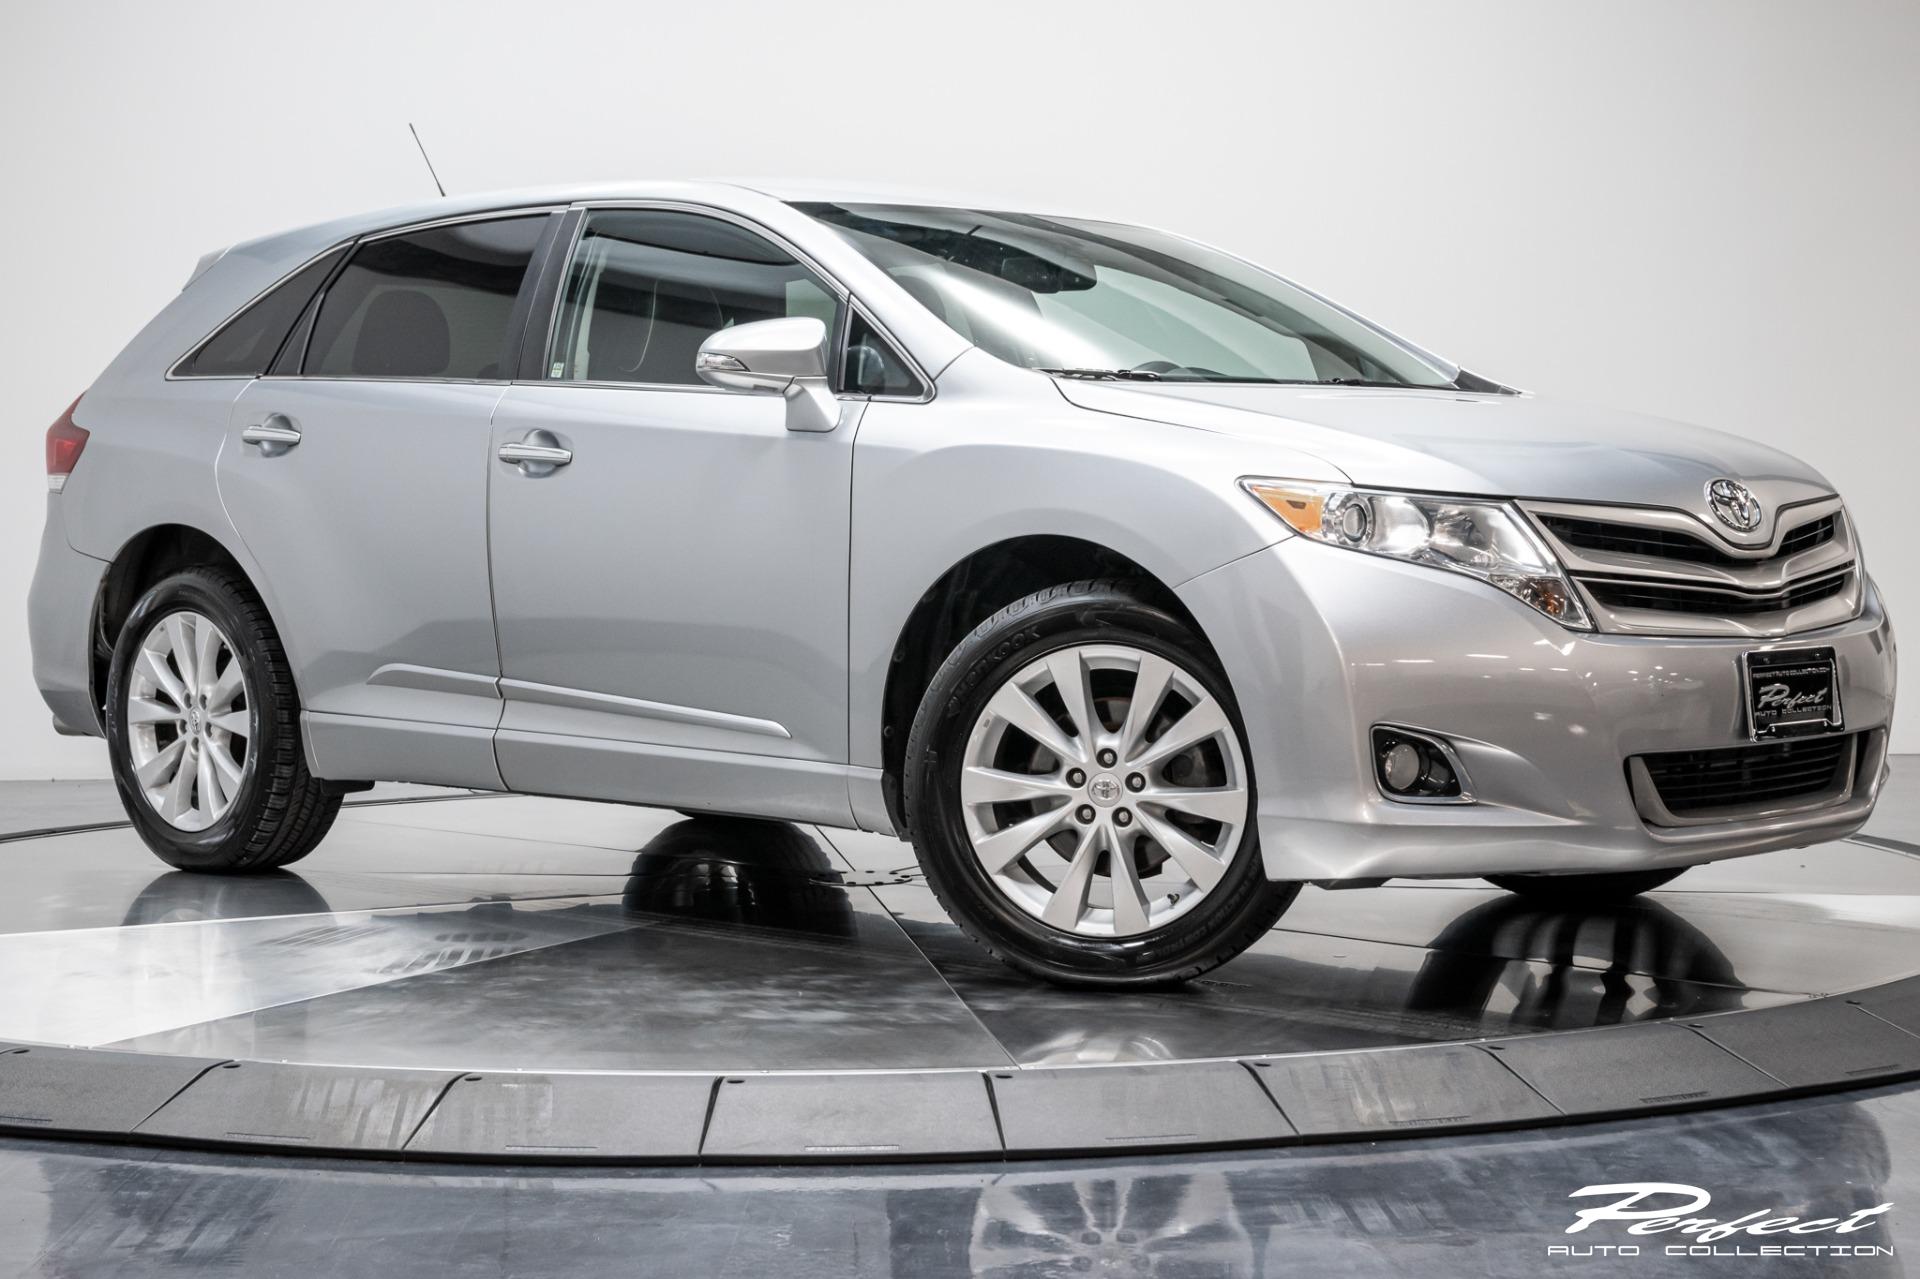 Used 2015 Toyota Venza XLE For Sale ($16,793) | Perfect Auto Collection Stock #074599 2014 Toyota Venza Tire Size P245 55r19 Le Xle